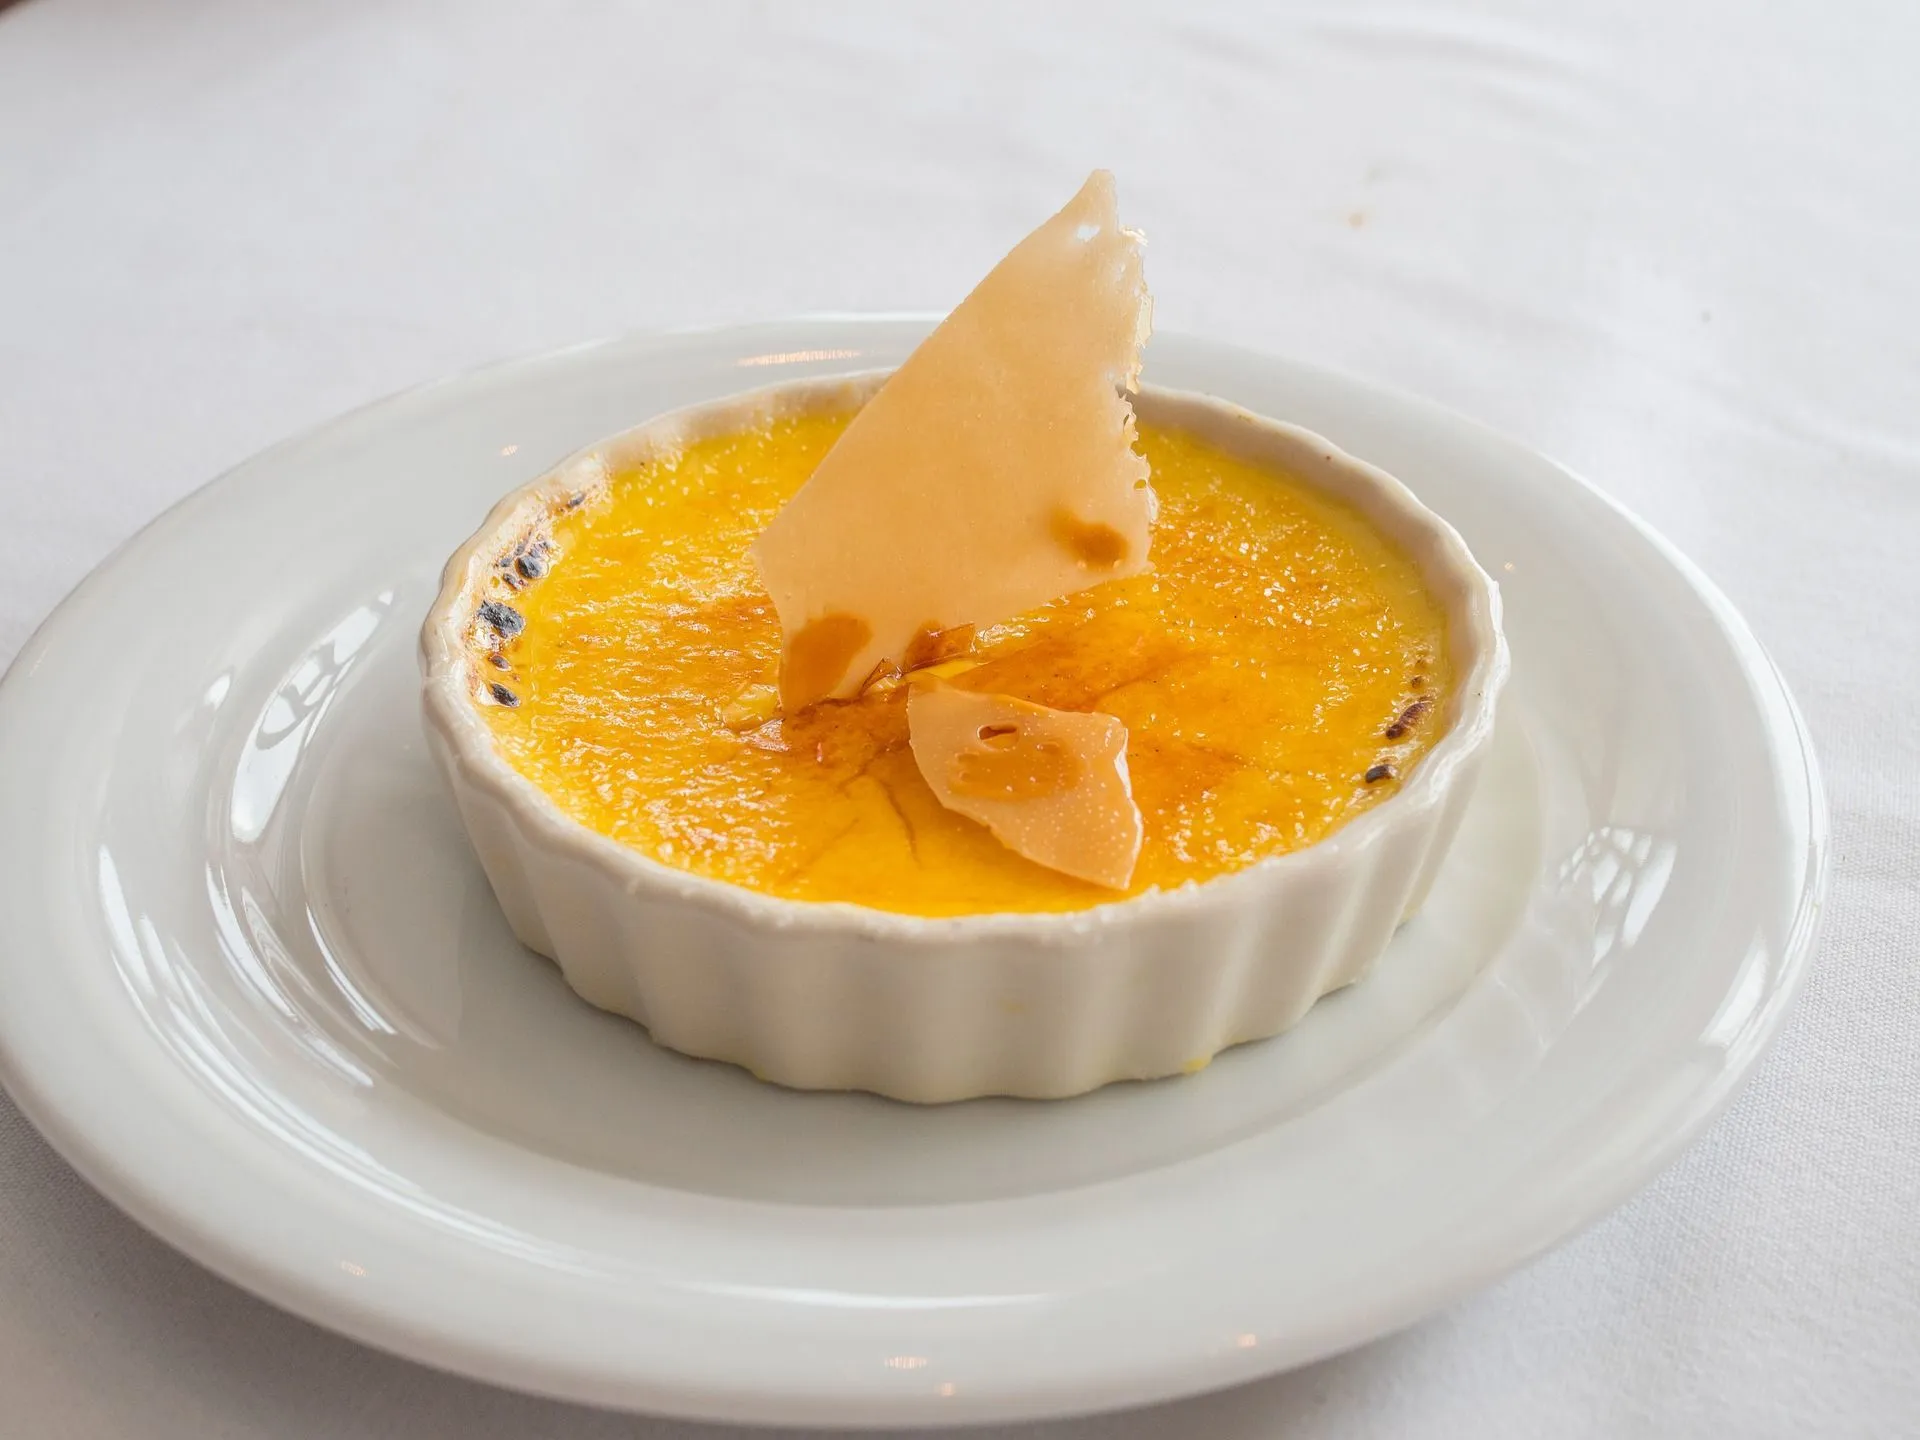 Creme brulee is globally loved!